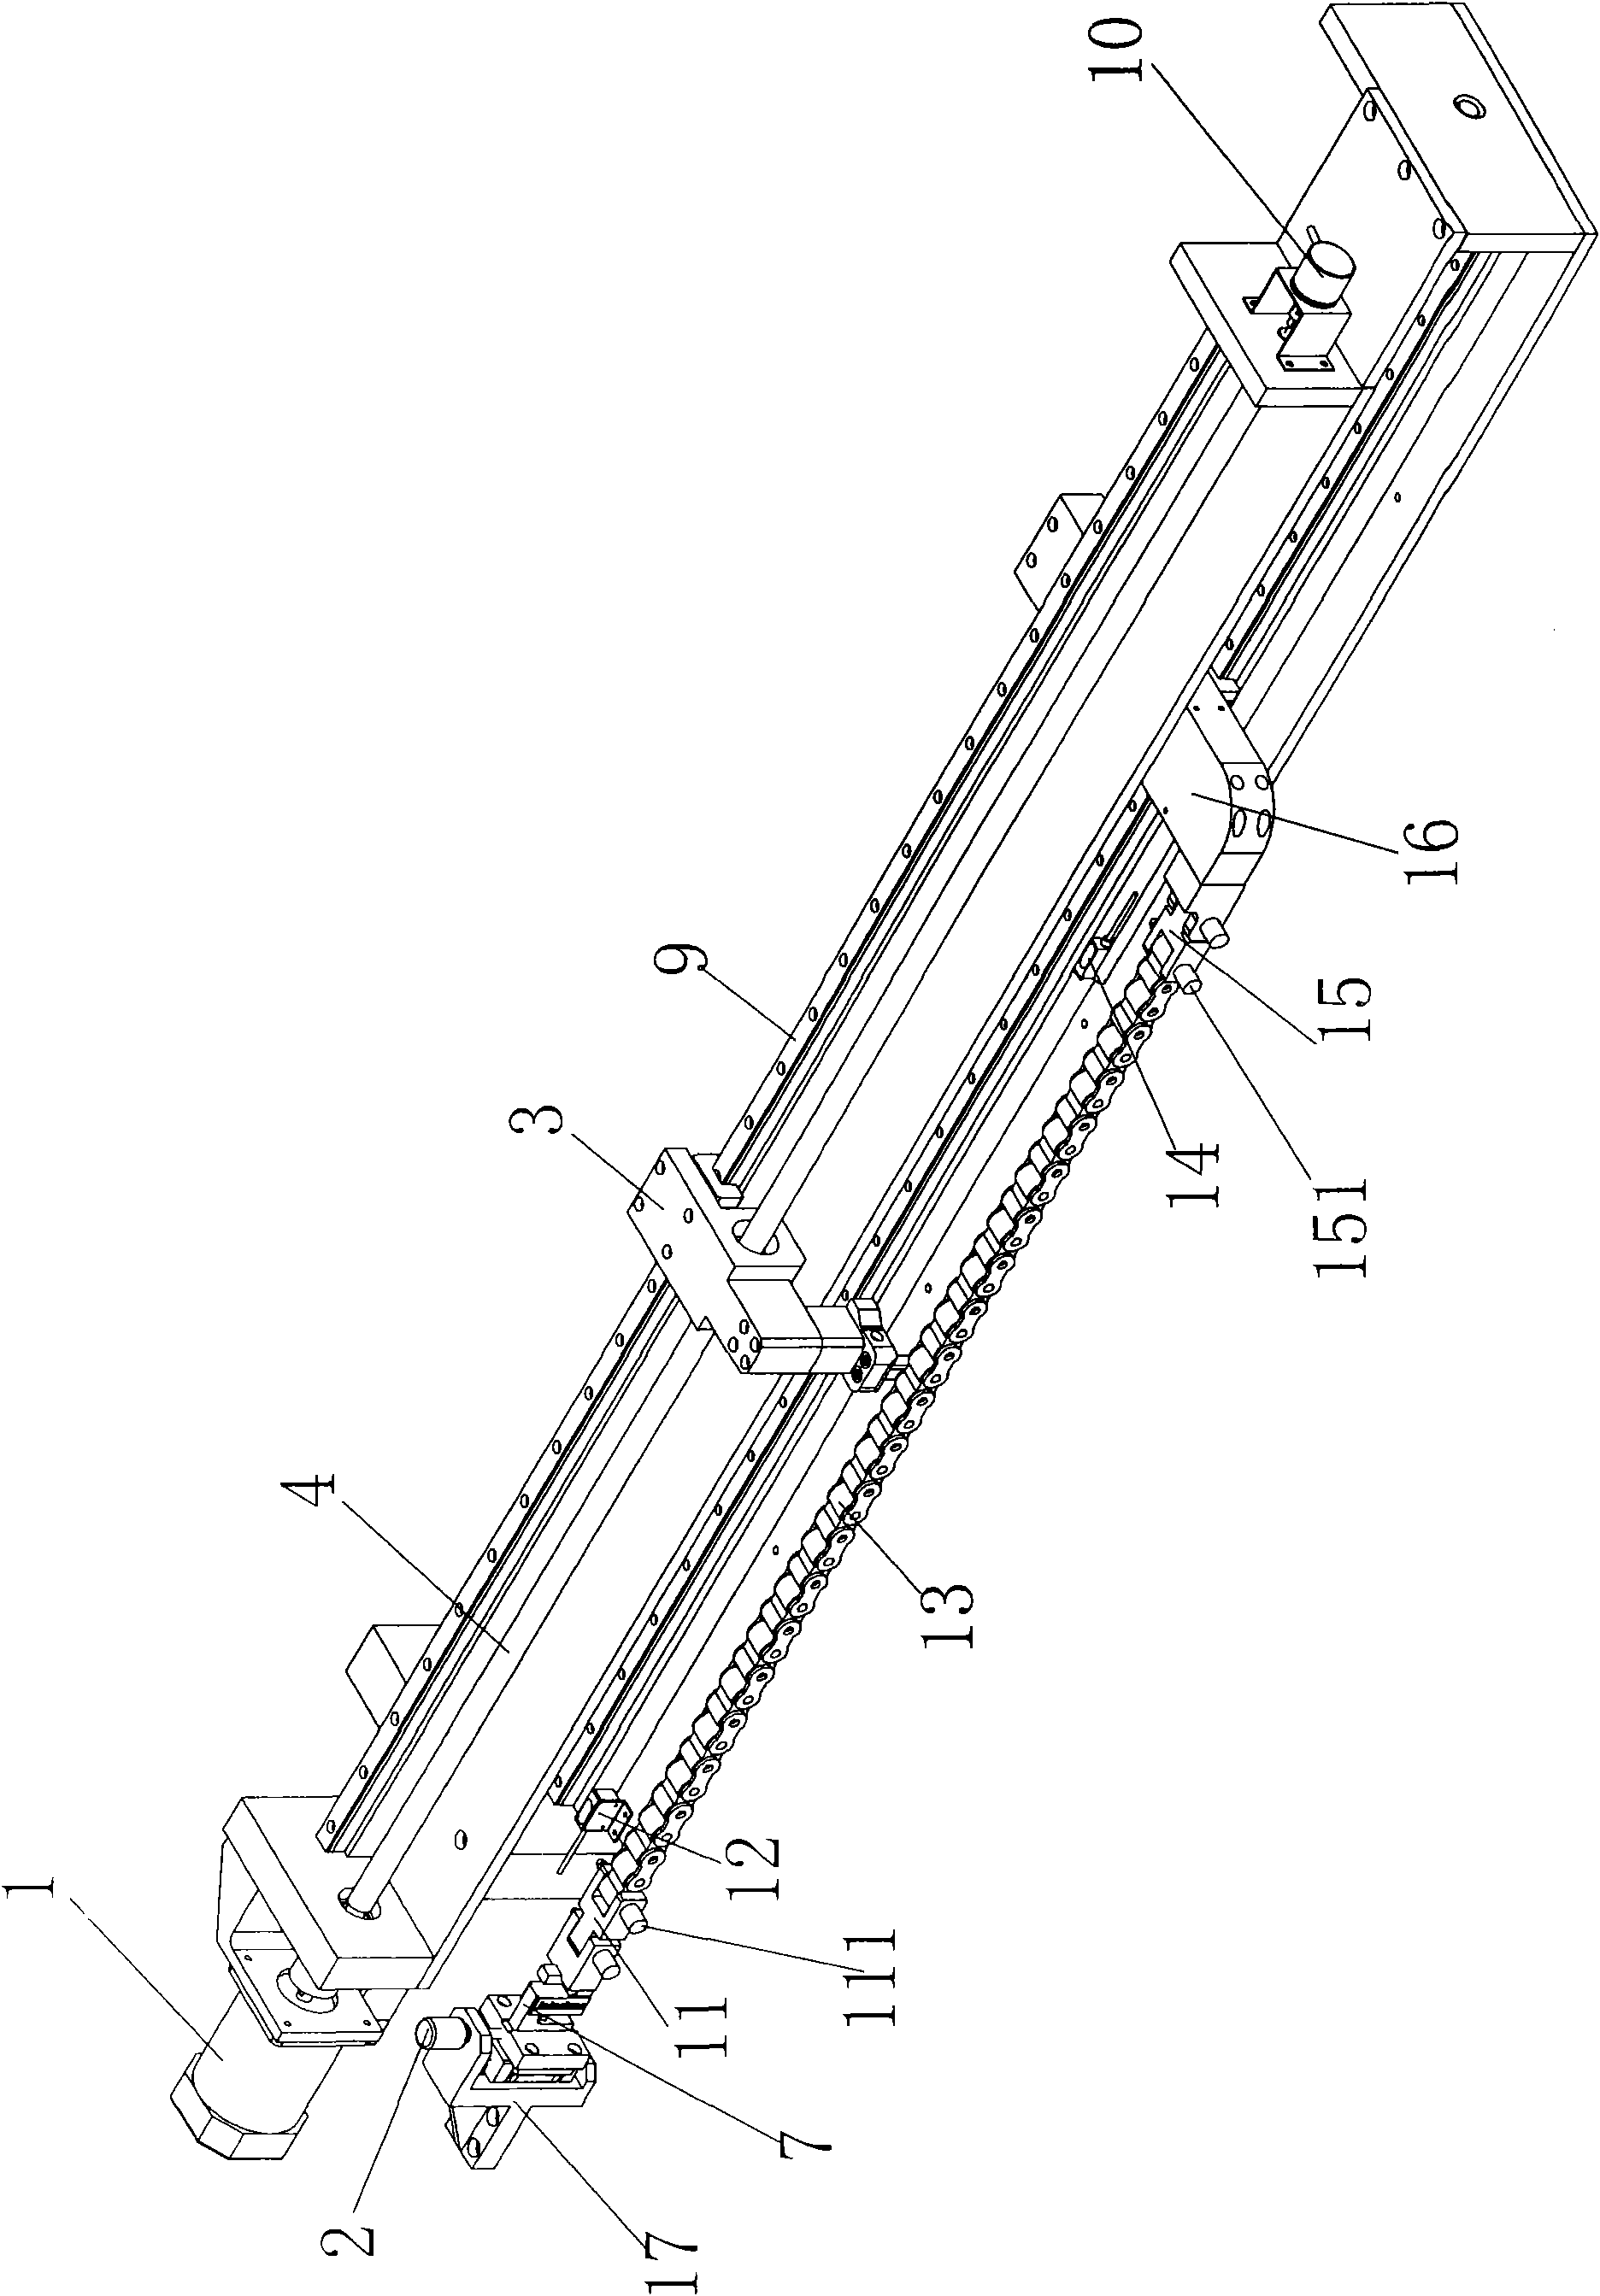 Chain length measuring instrument